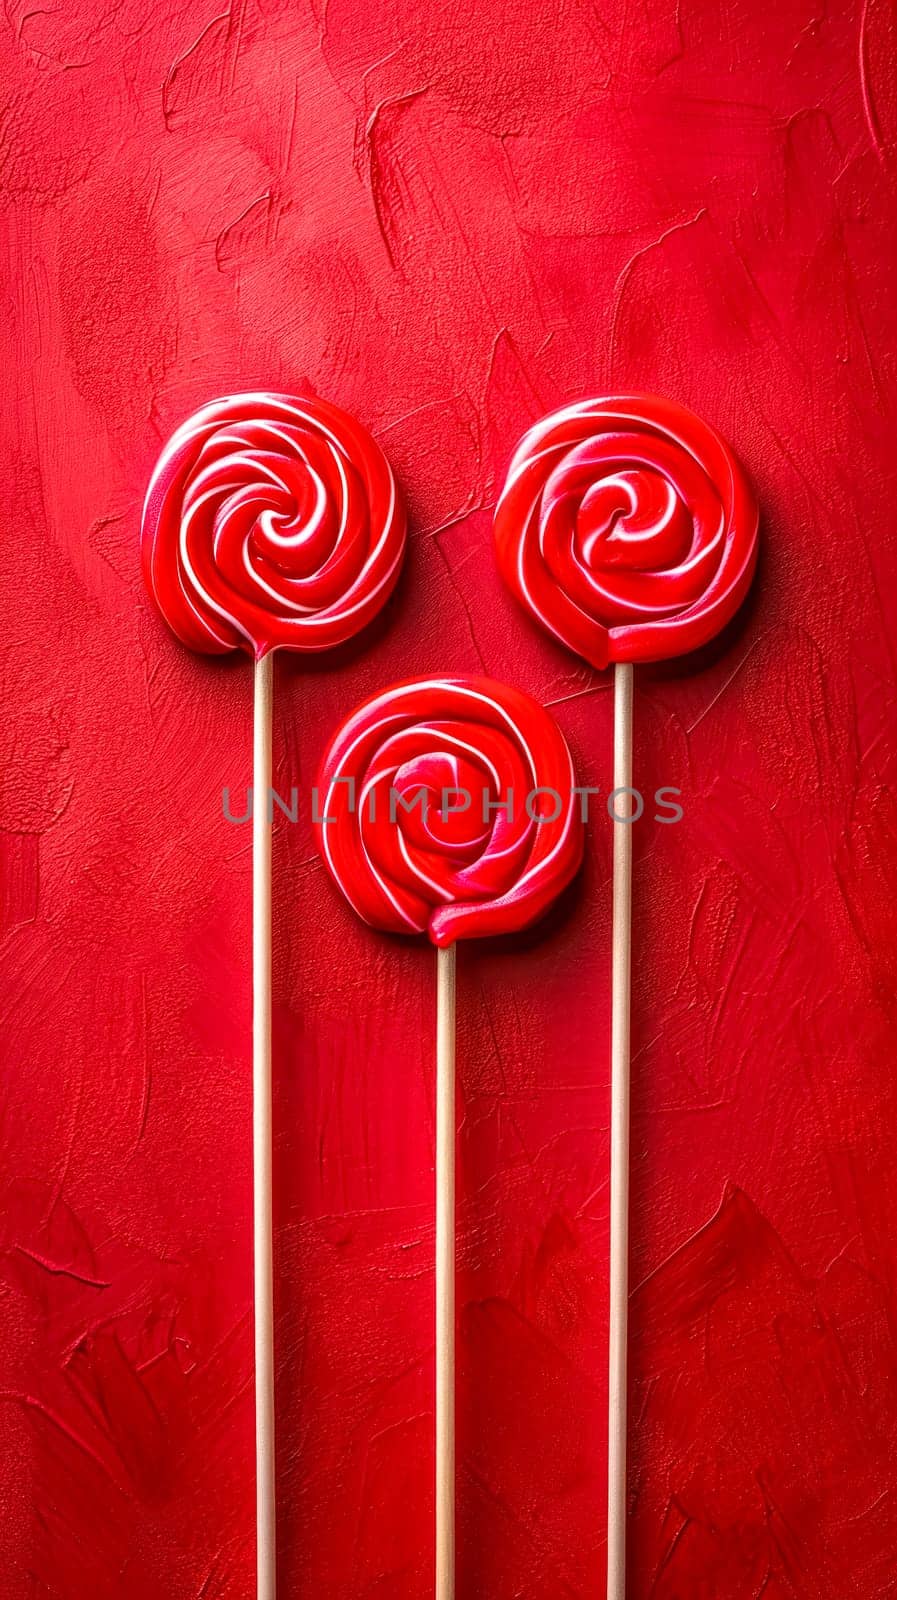 three red and white swirled lollipops on sticks aligned vertically against a textured red background, vertical